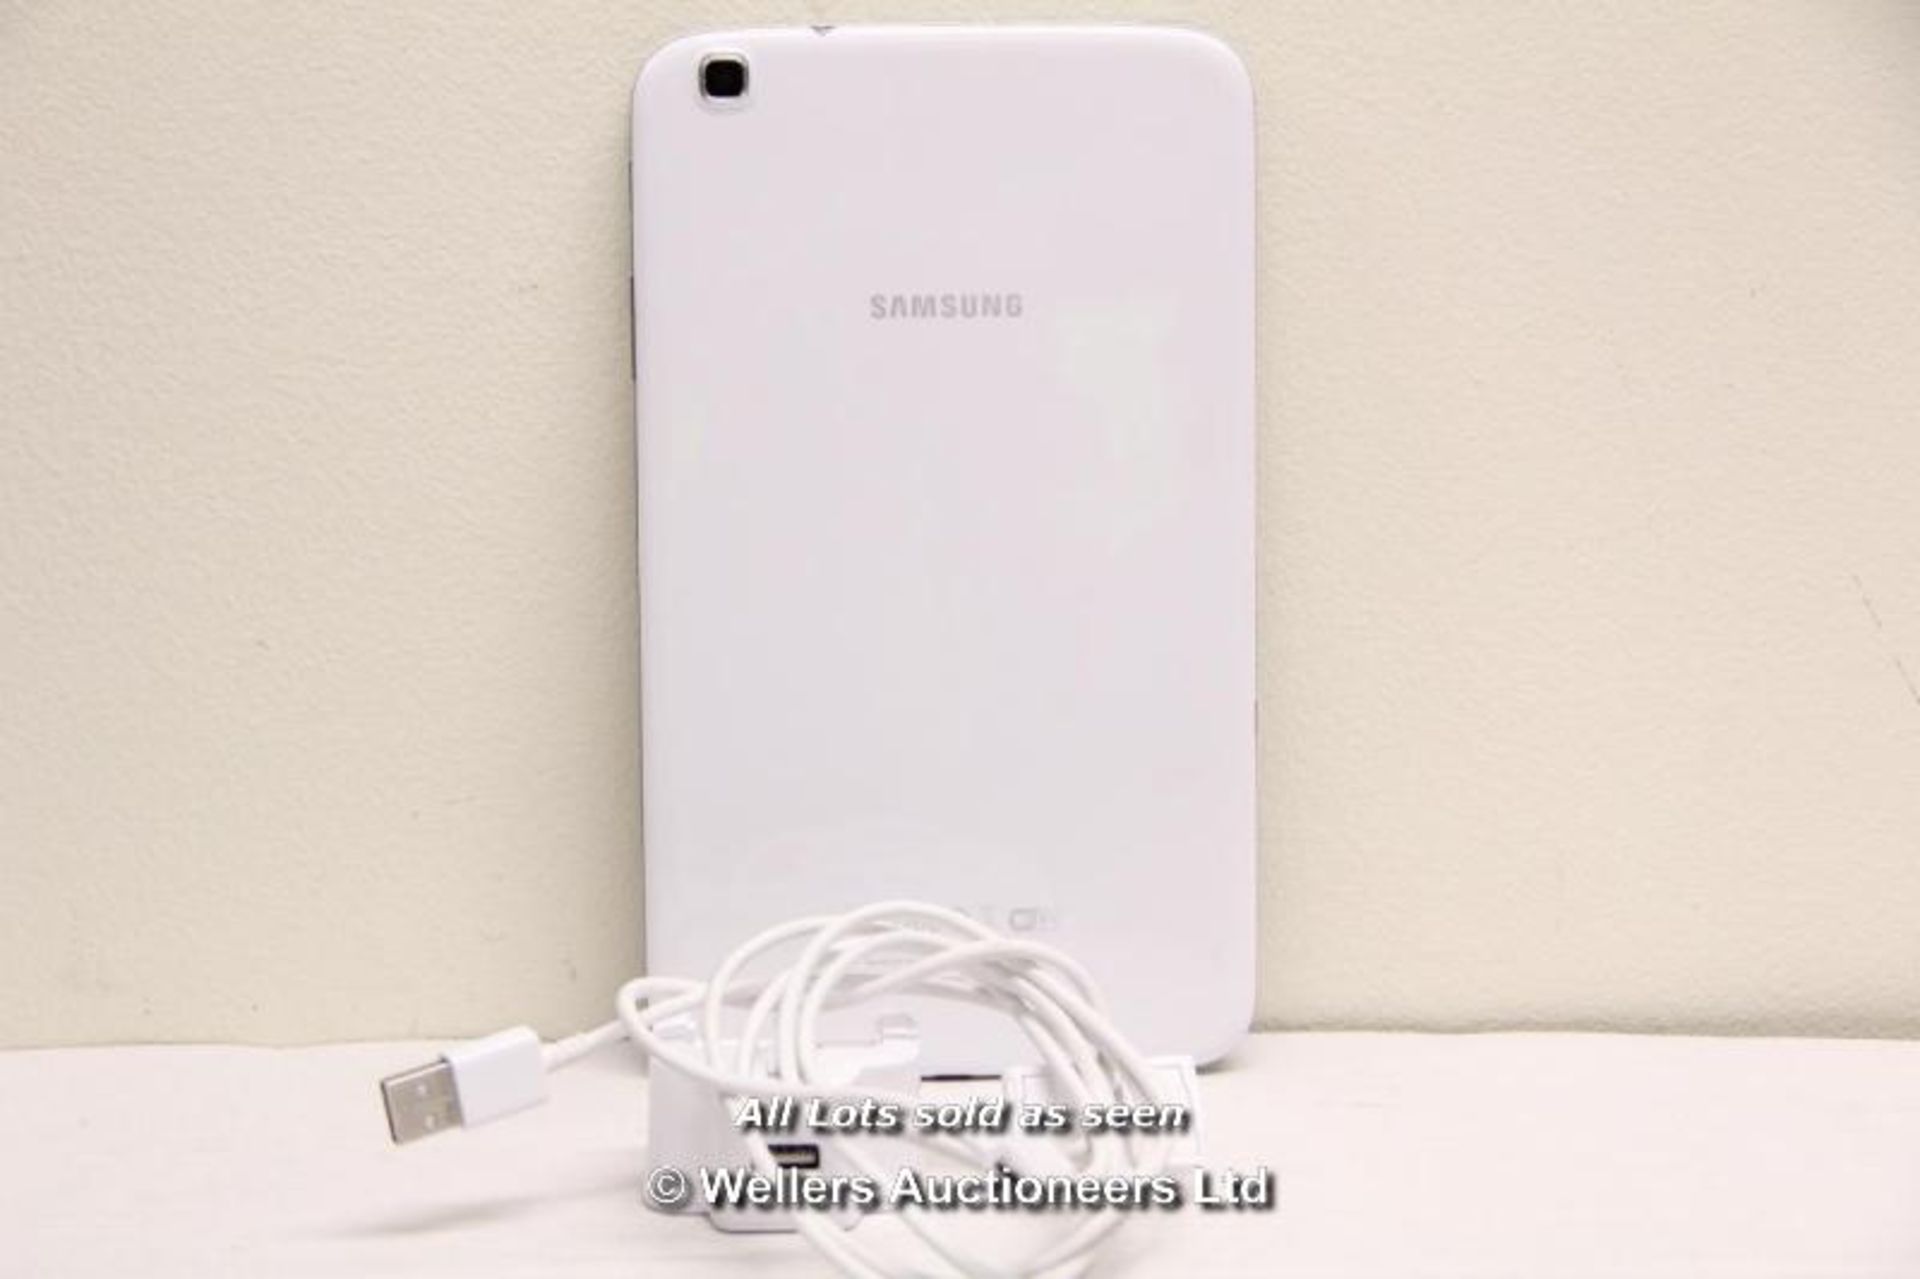 SAMSUNG GALAXY TAB 3 SM-T310 16GB WI-FI  8" - WHITE (36064212) / INCLUDING CHARGER AND USB CABLE / - Image 2 of 2